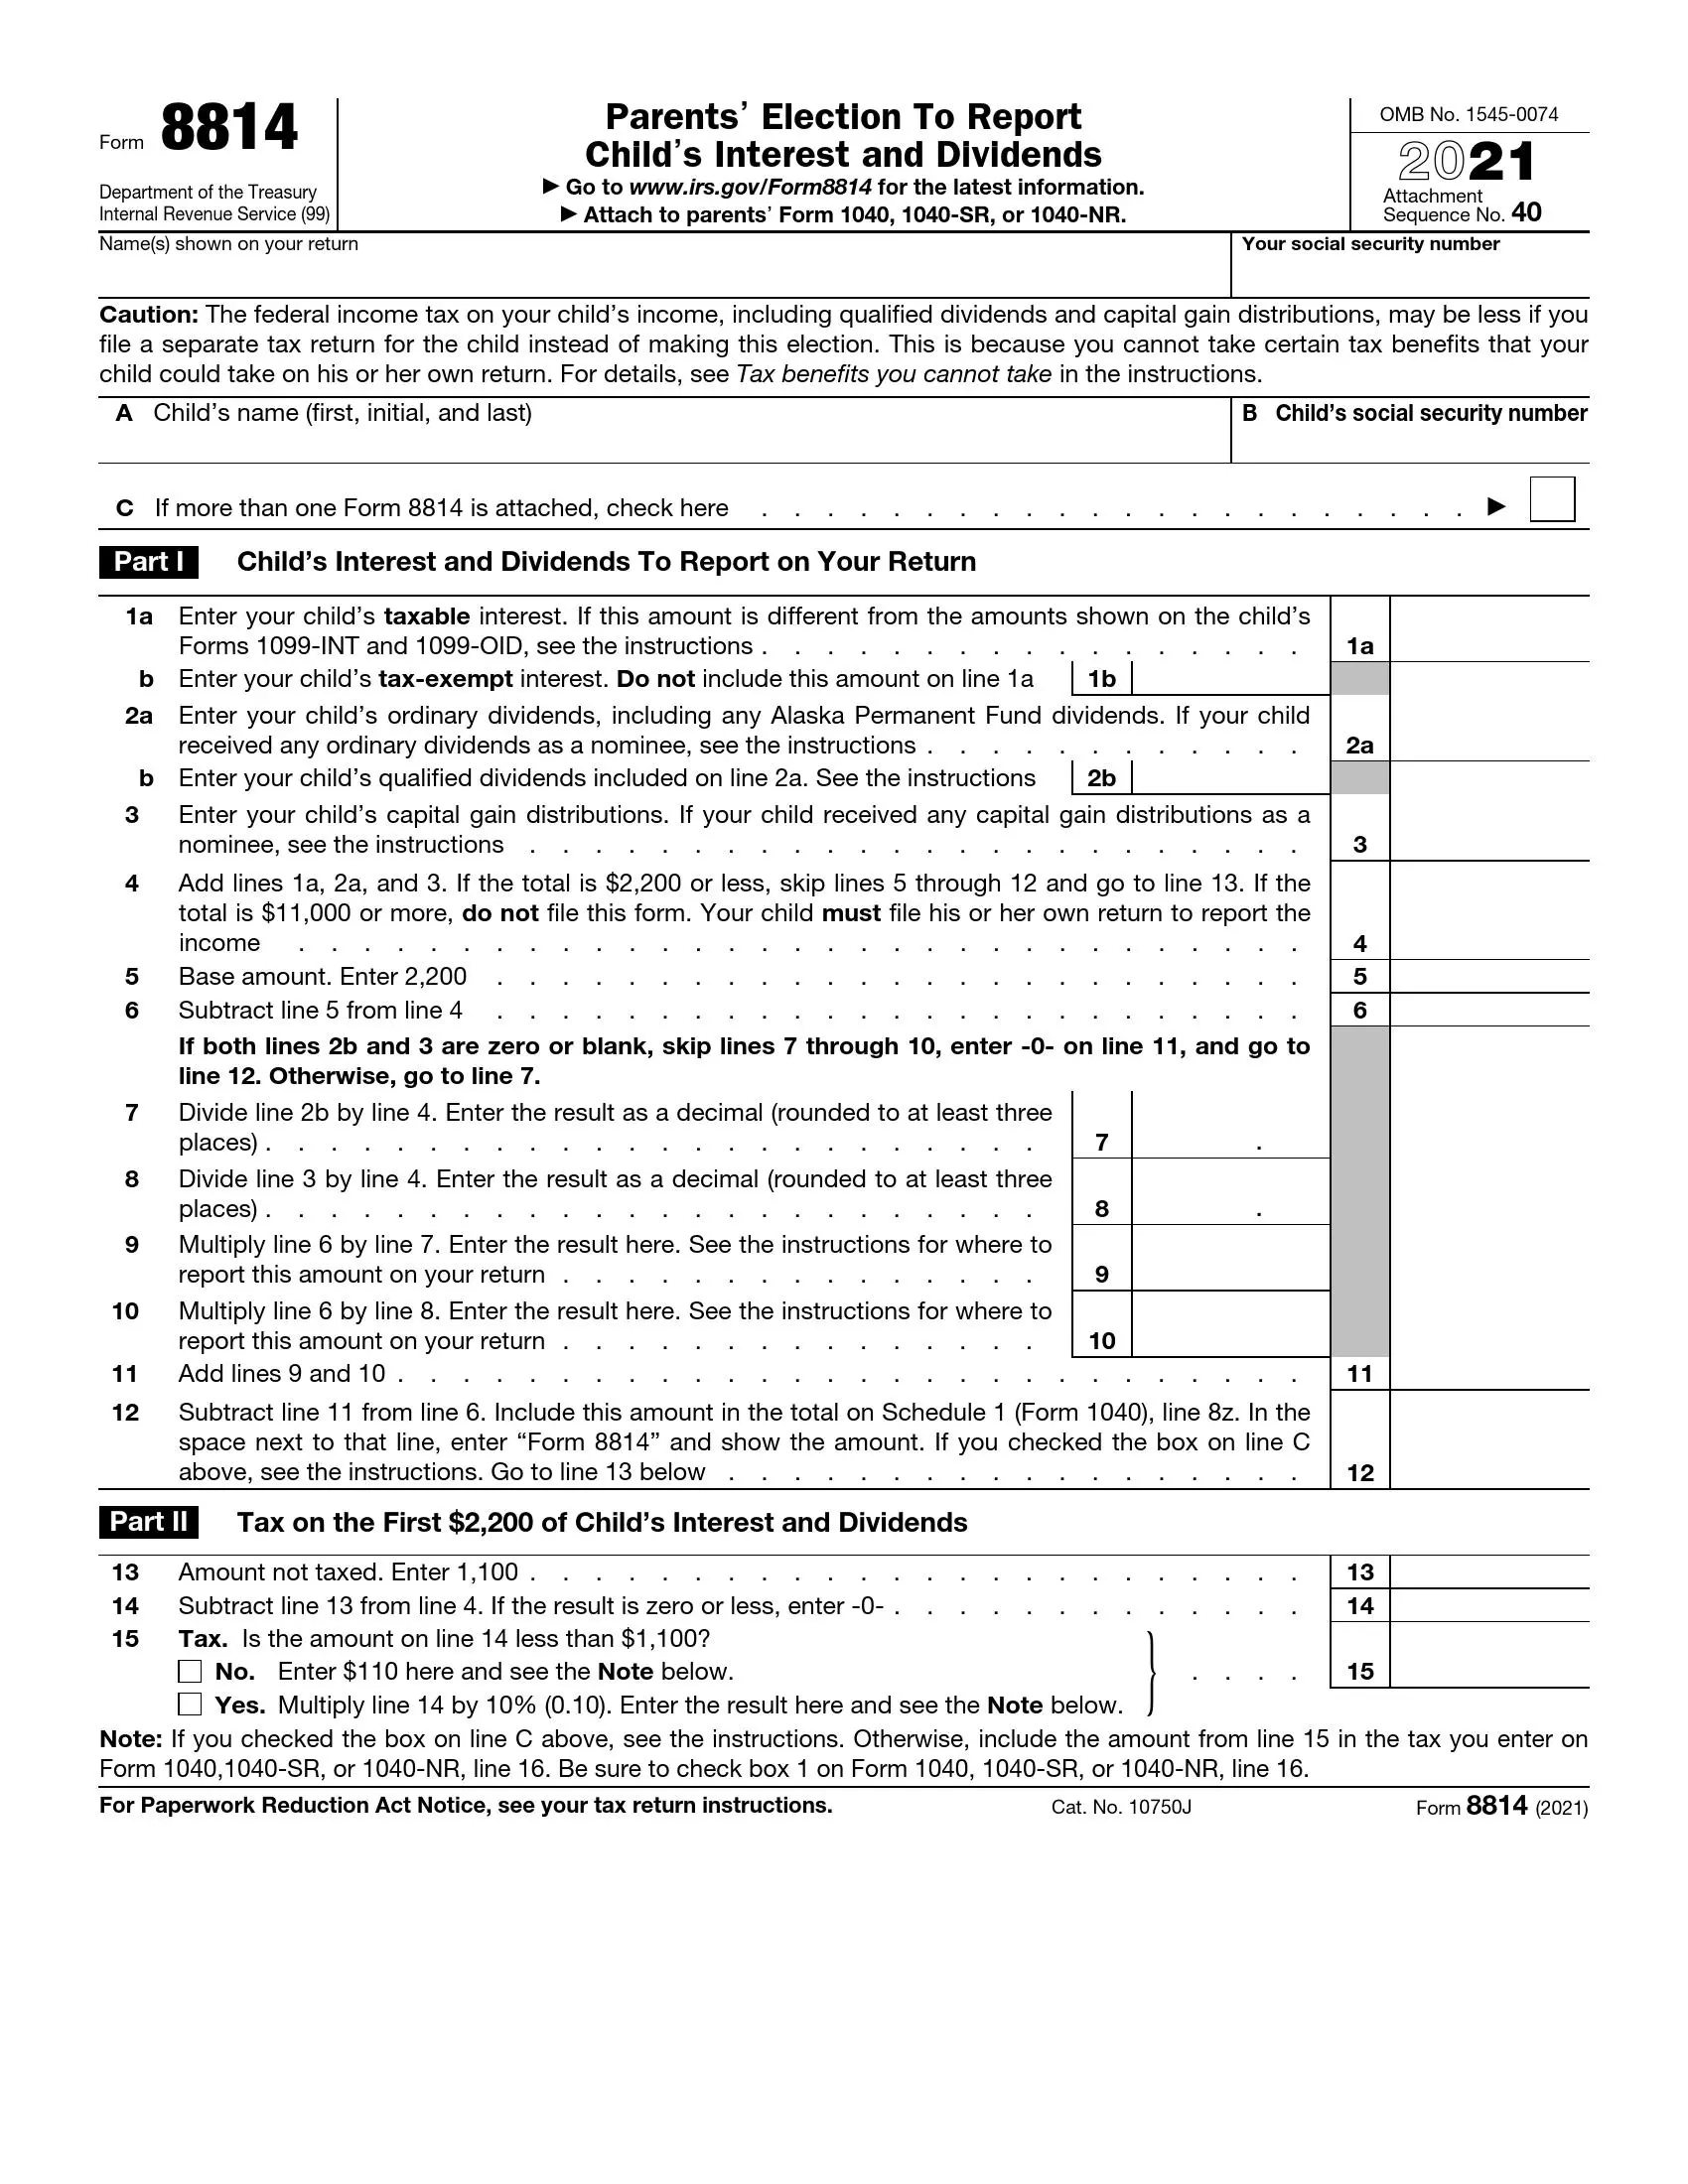 irs form 8814 2021 preview